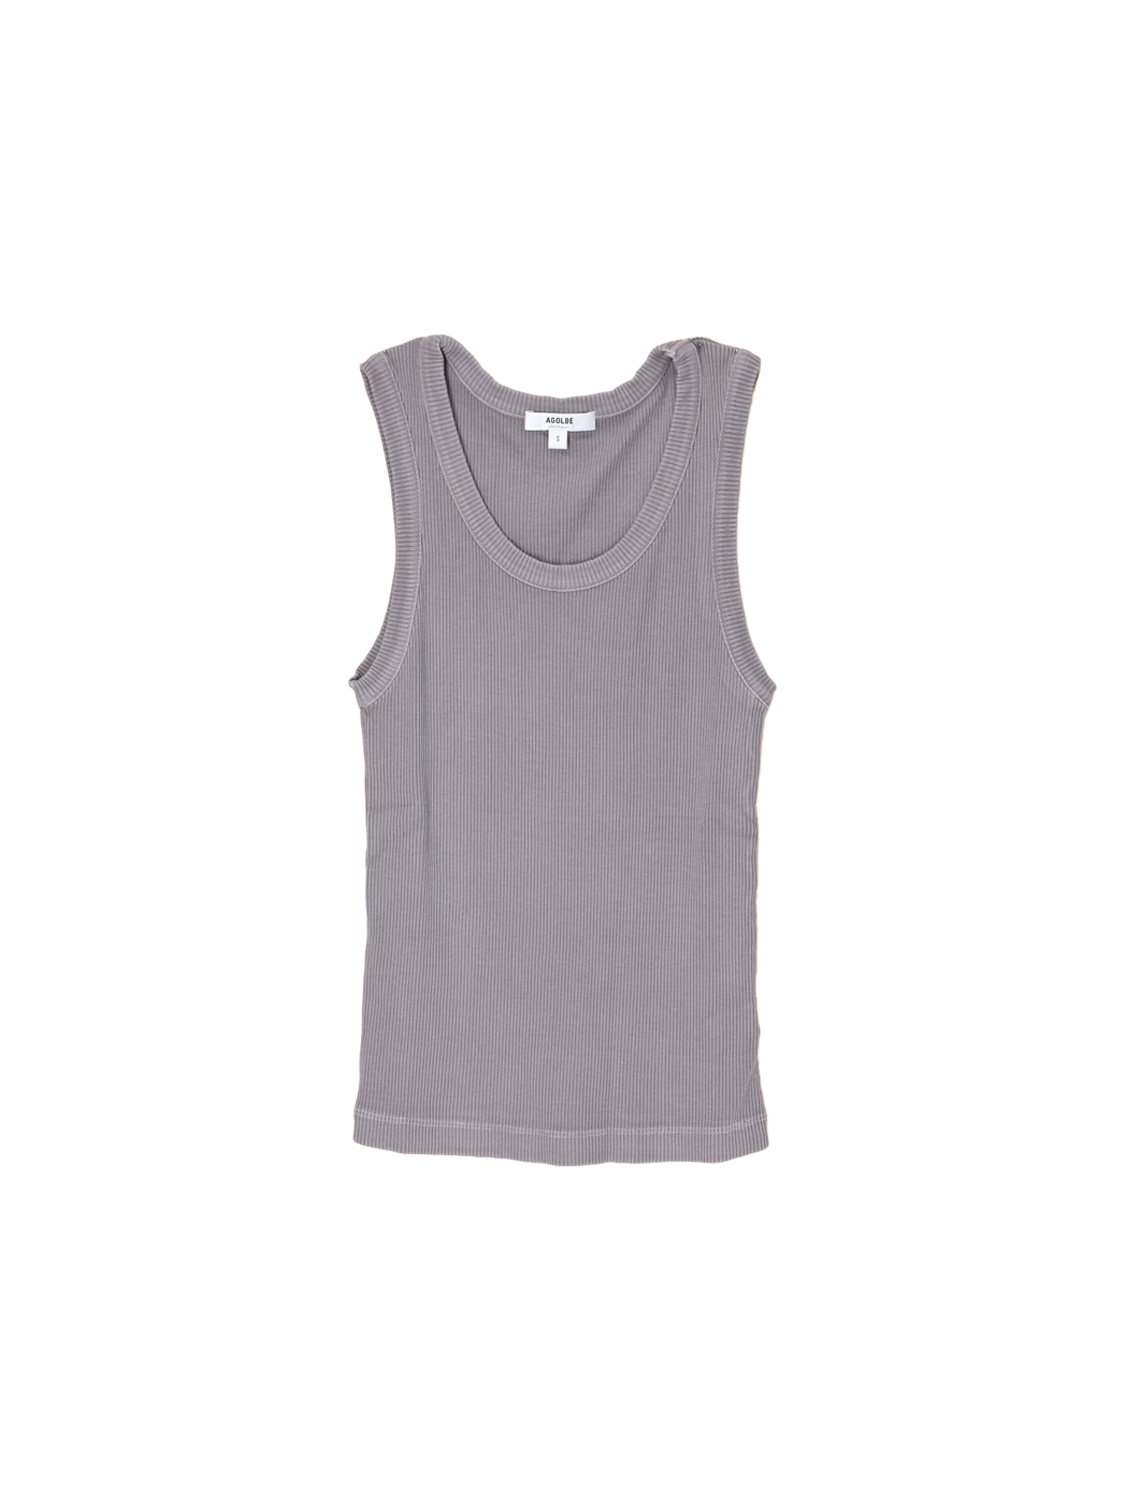 Poppy Tank – tank top made from a cotton blend 